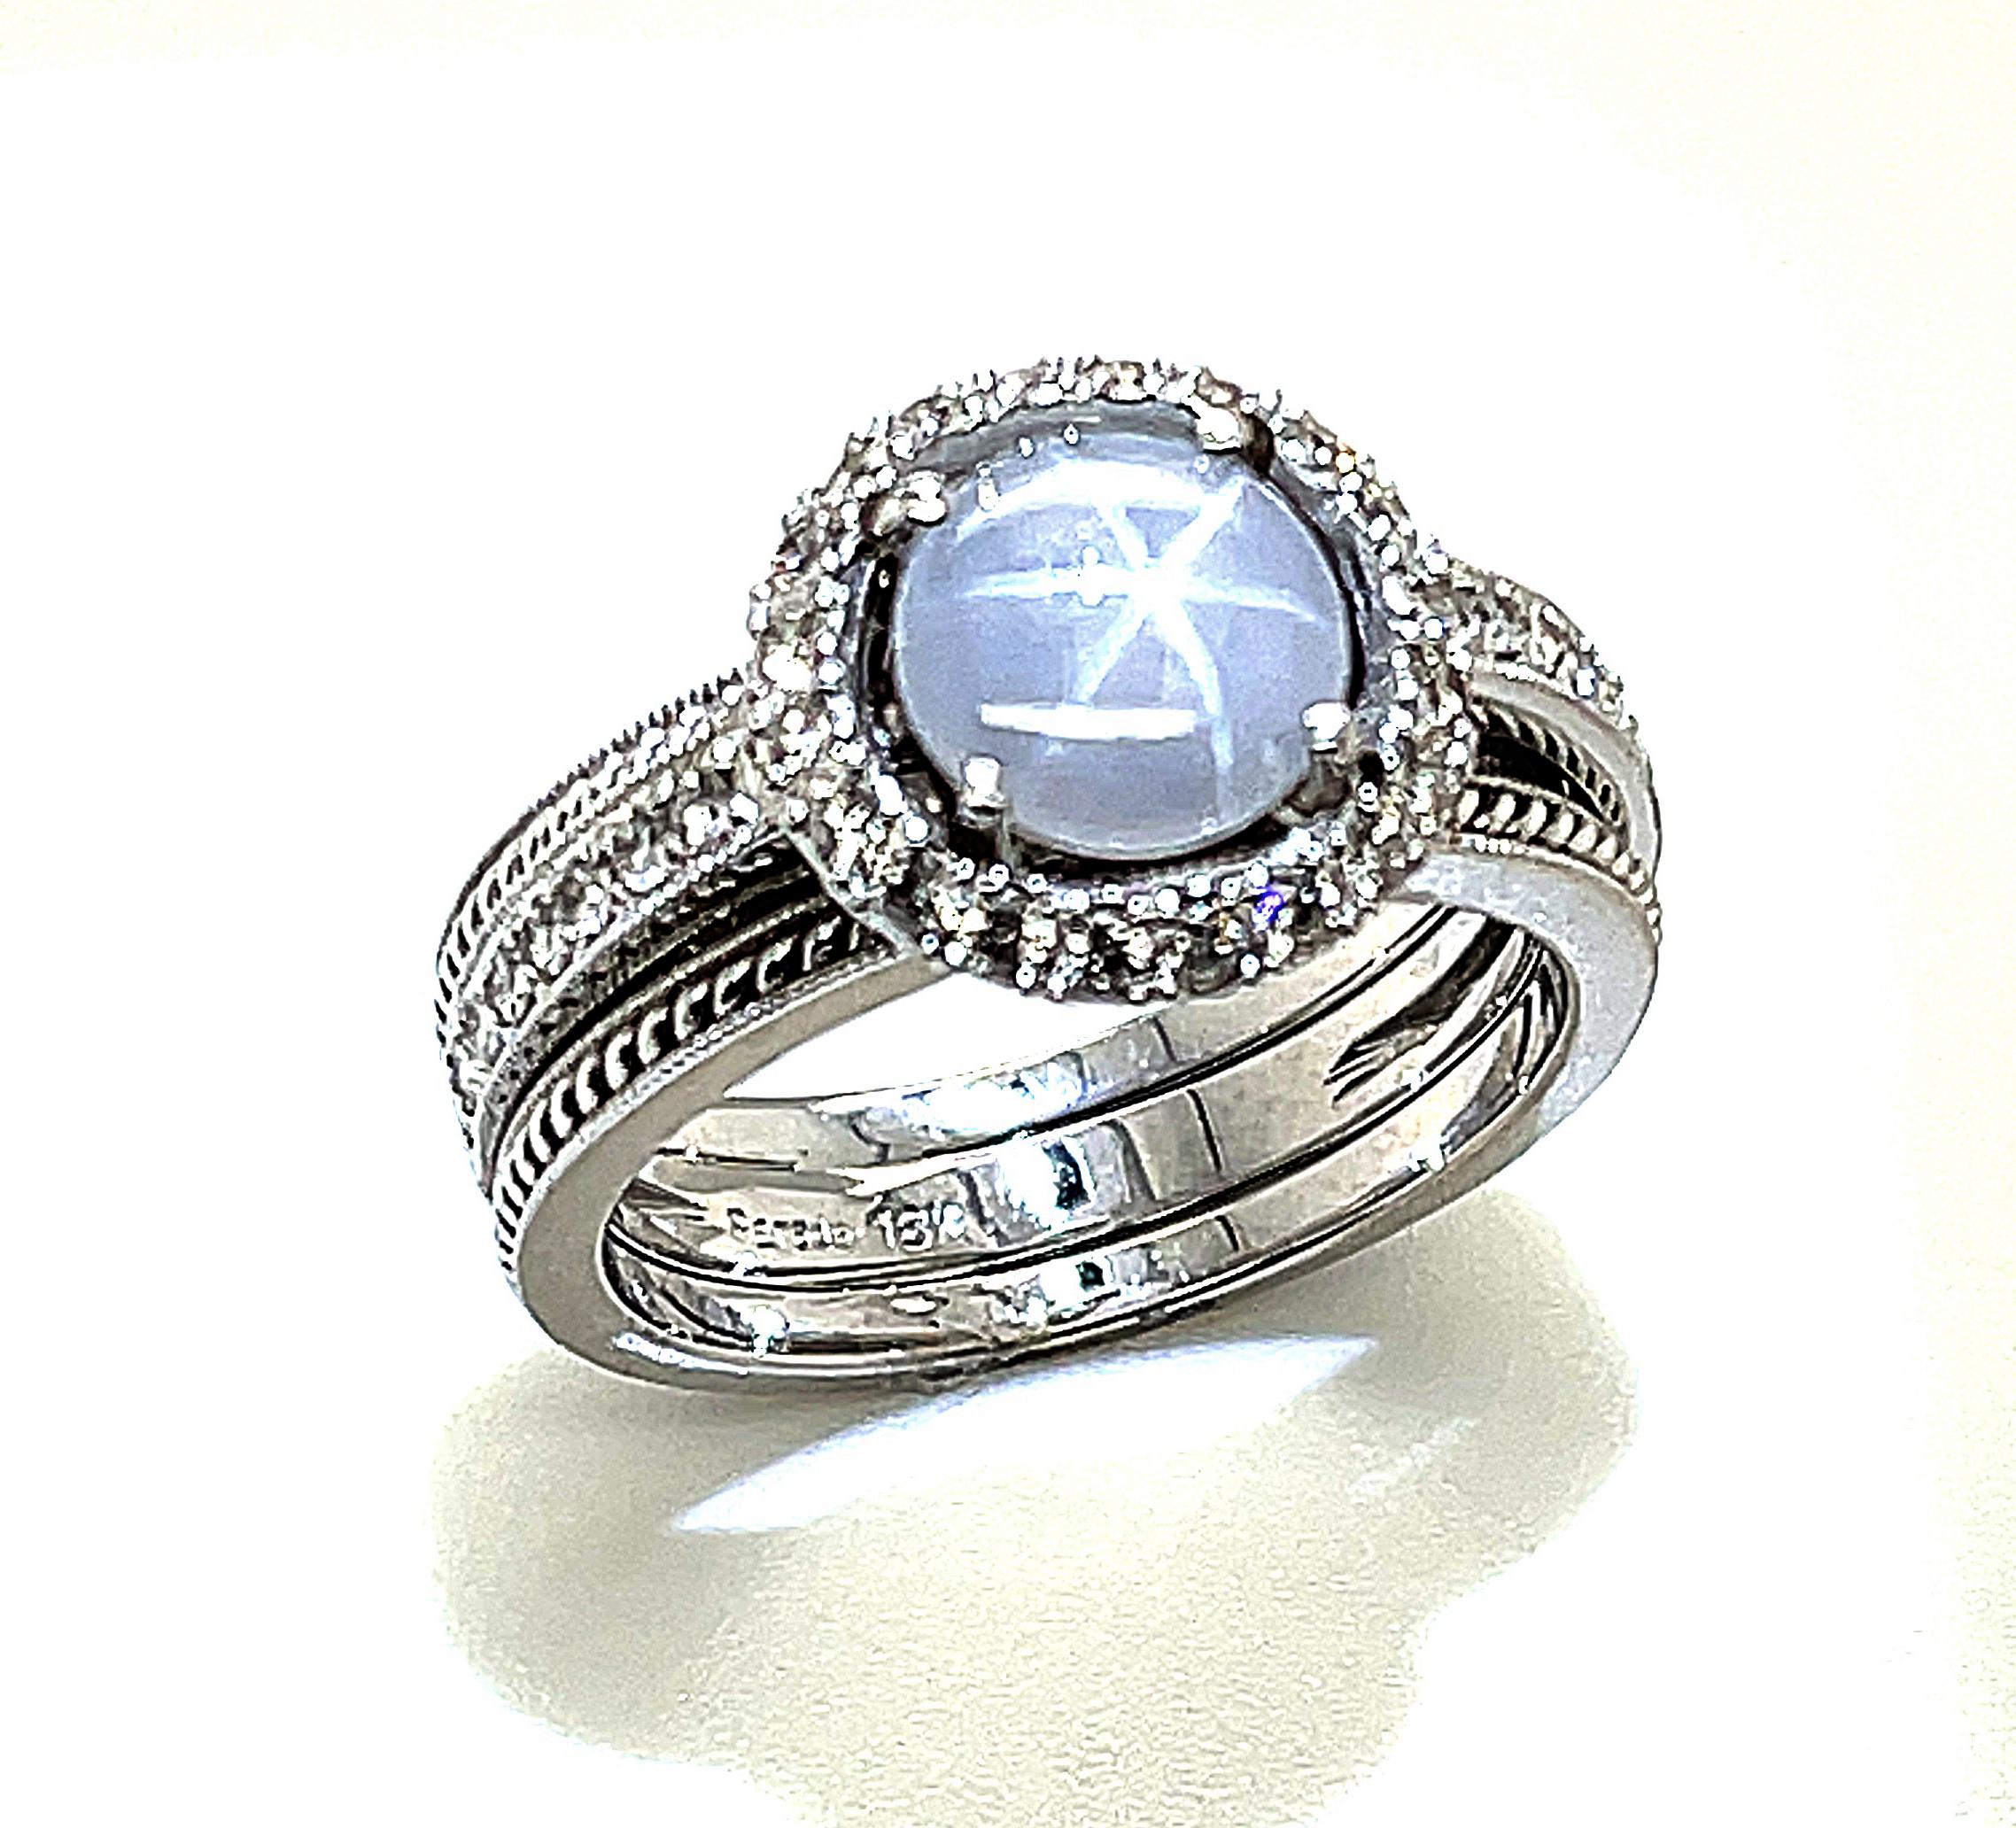 This ring is a beautiful statement of both quiet elegance and originality. Featuring a violetish-grey star sapphire with a bright 6-rayed star when viewed in focused light, this ring combines a variety of textures to create an eye-catching ring that